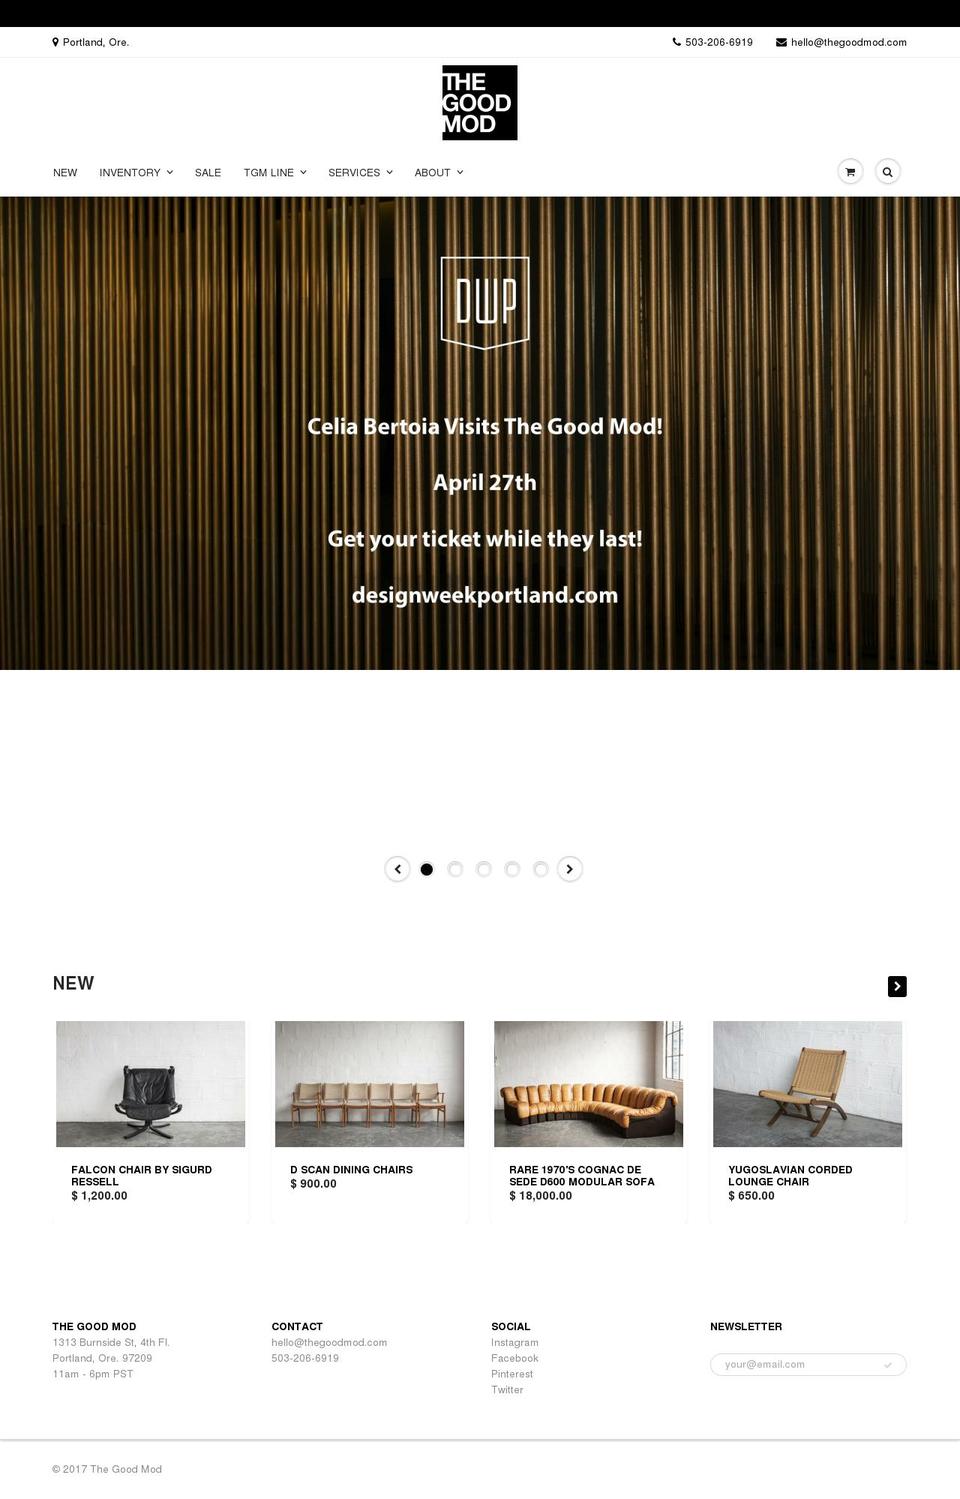 ShowTime Shopify theme site example thegoodmod.com